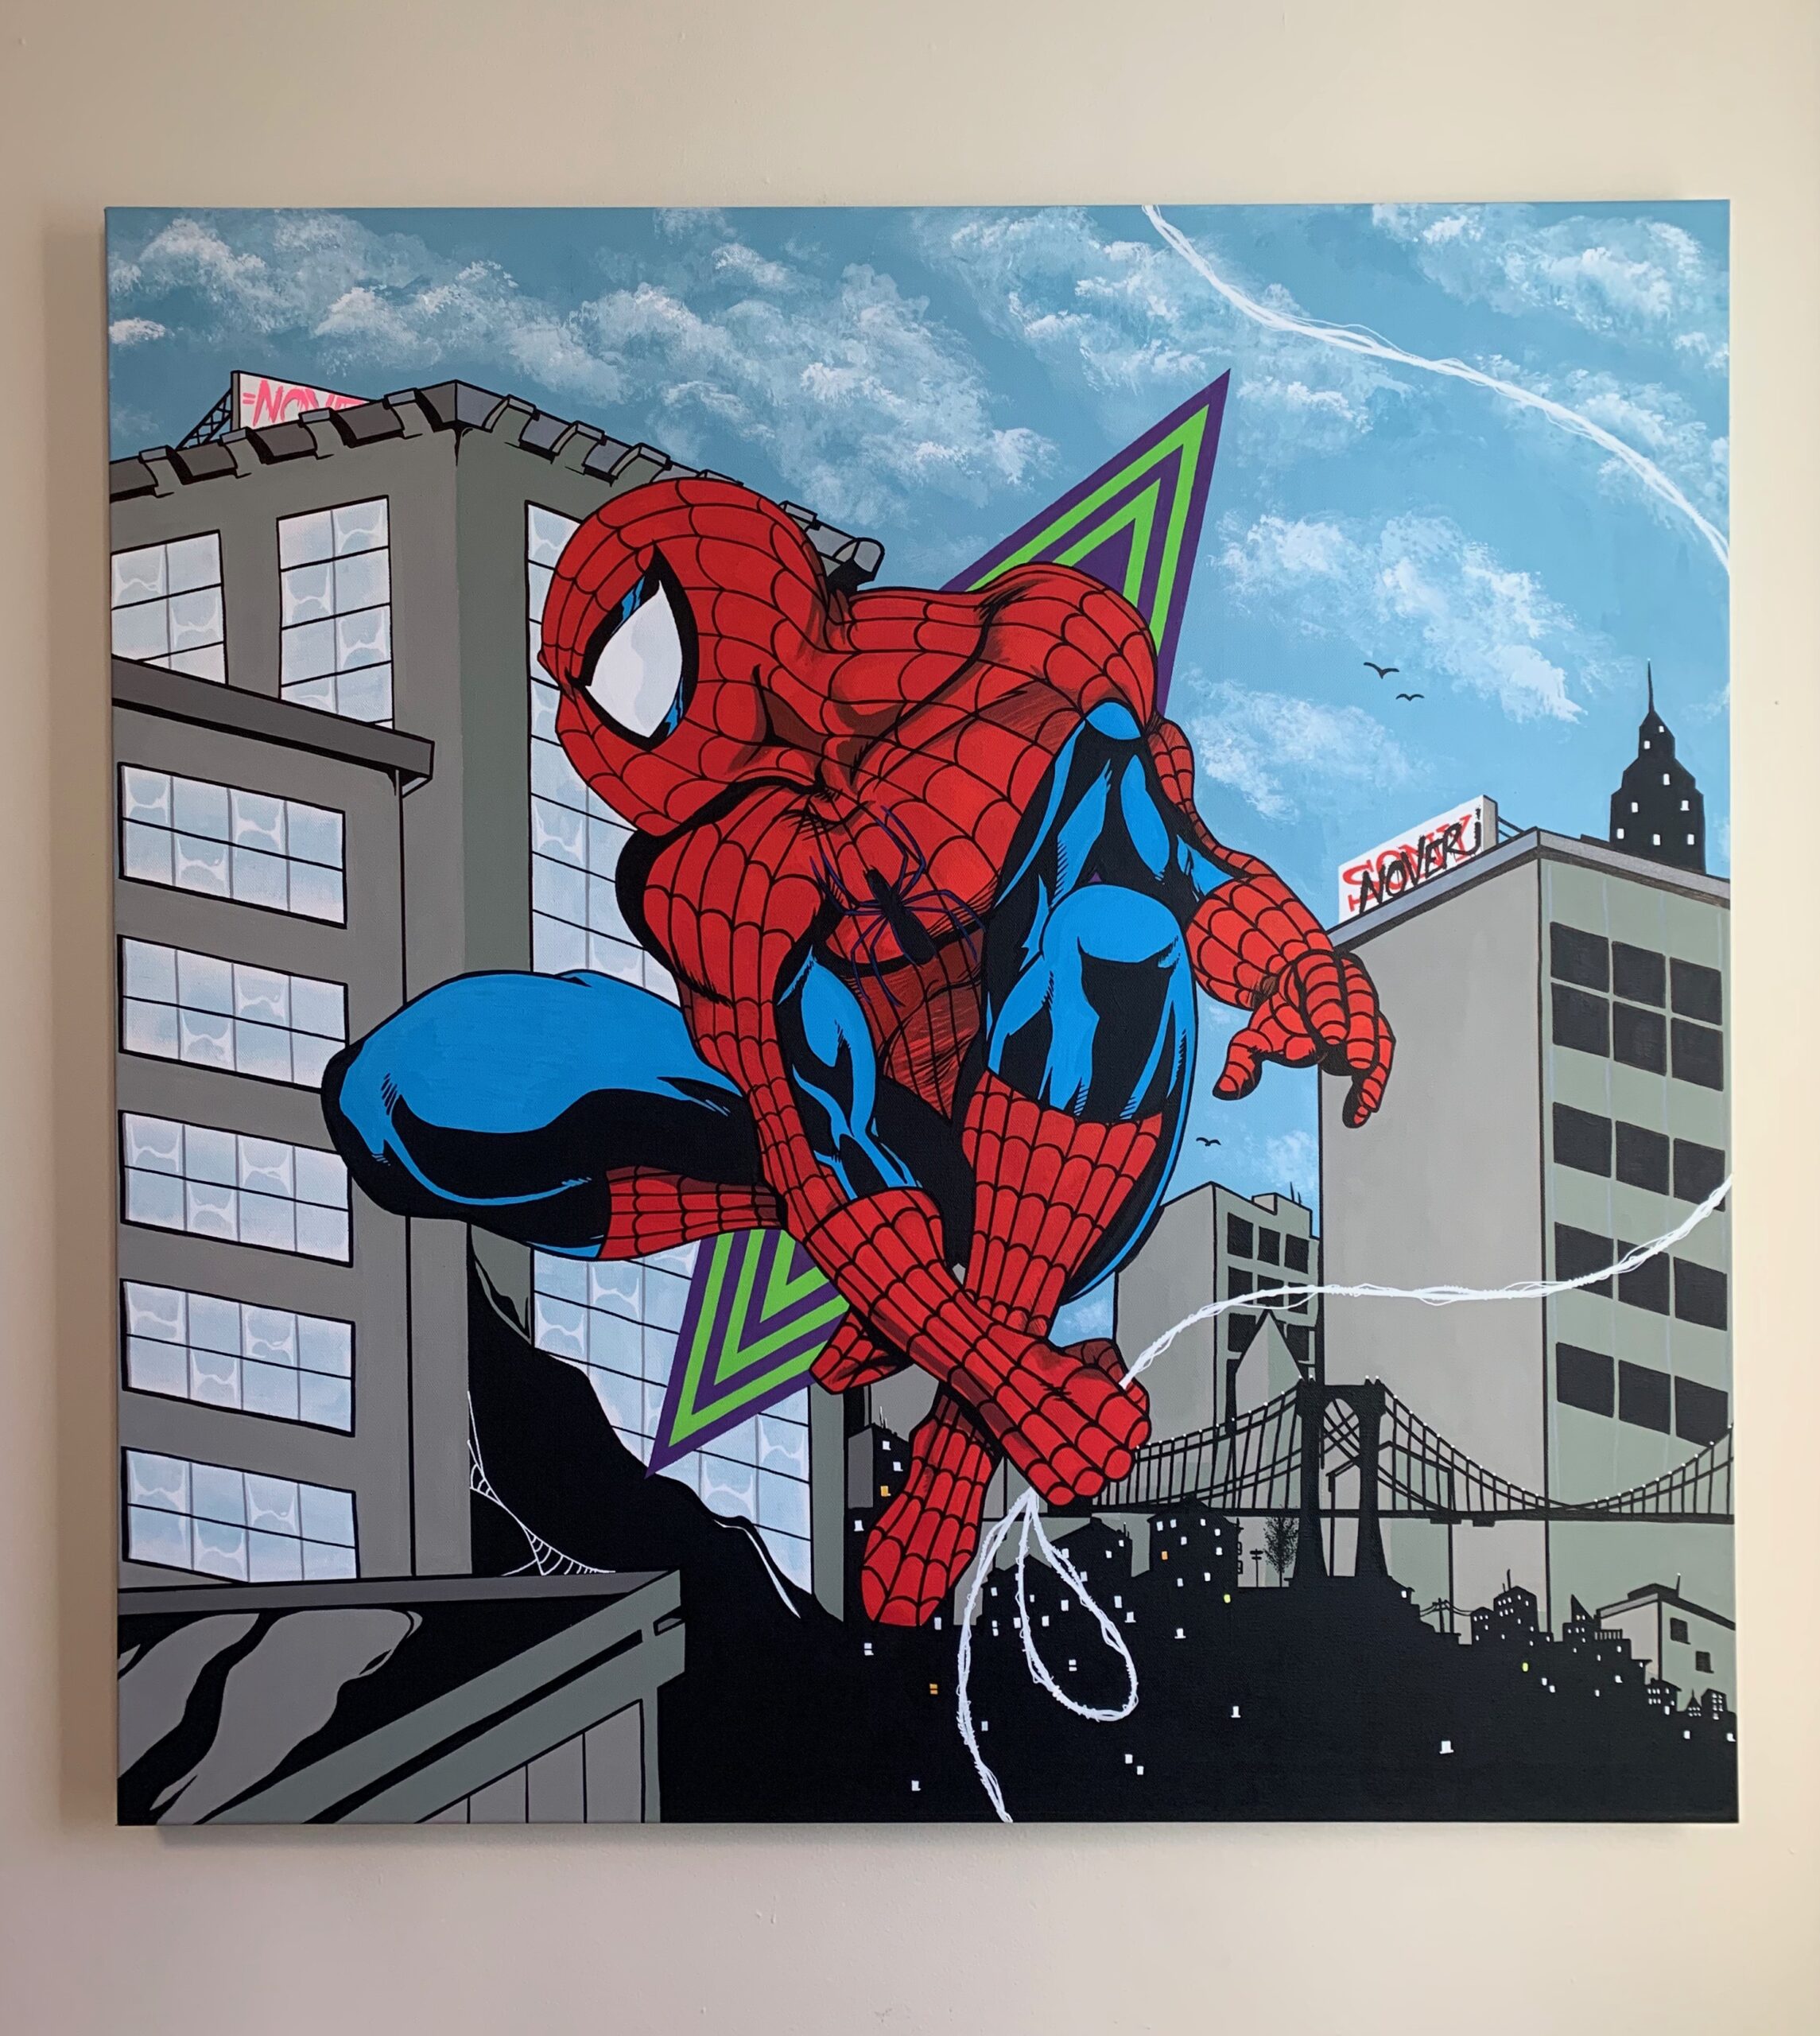 "Spider-Man" by Nover, 36 x 36'. Acrylic Paint on Canvas, 2019.